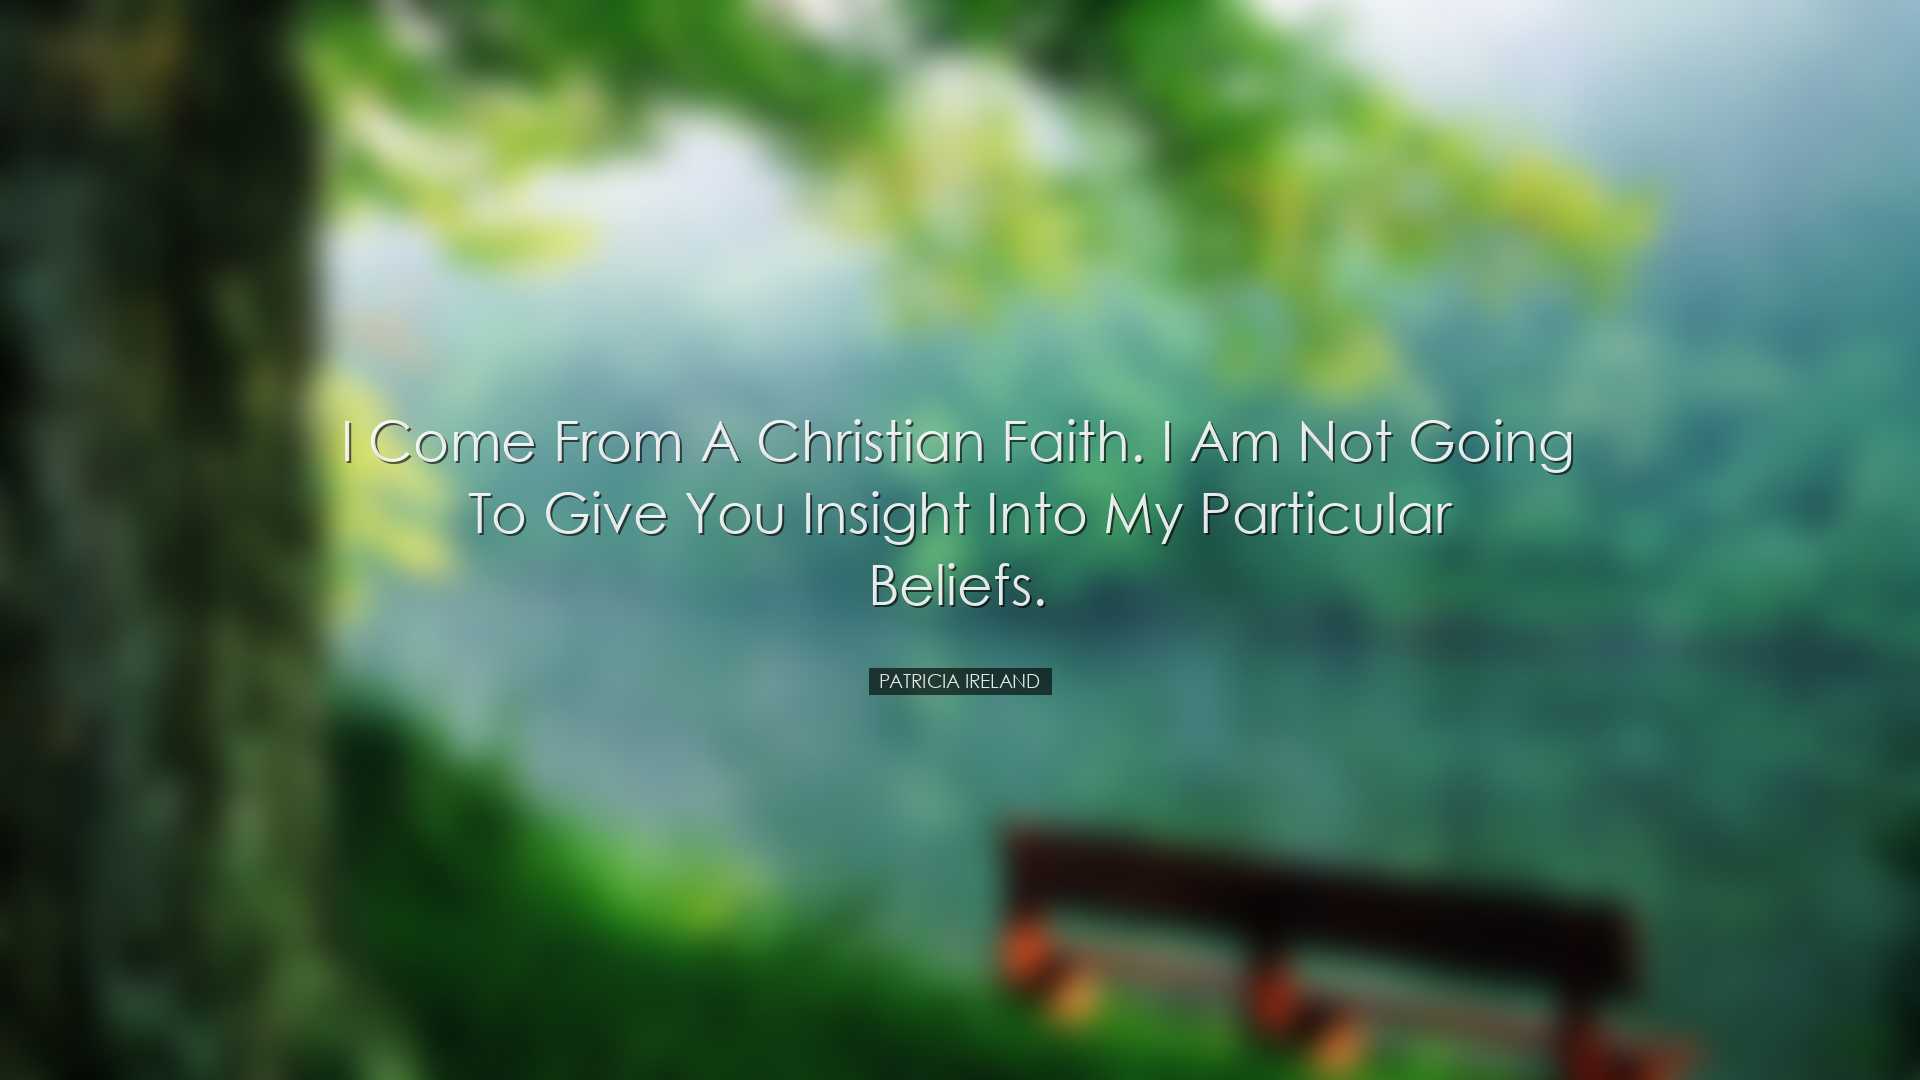 I come from a Christian faith. I am not going to give you insight